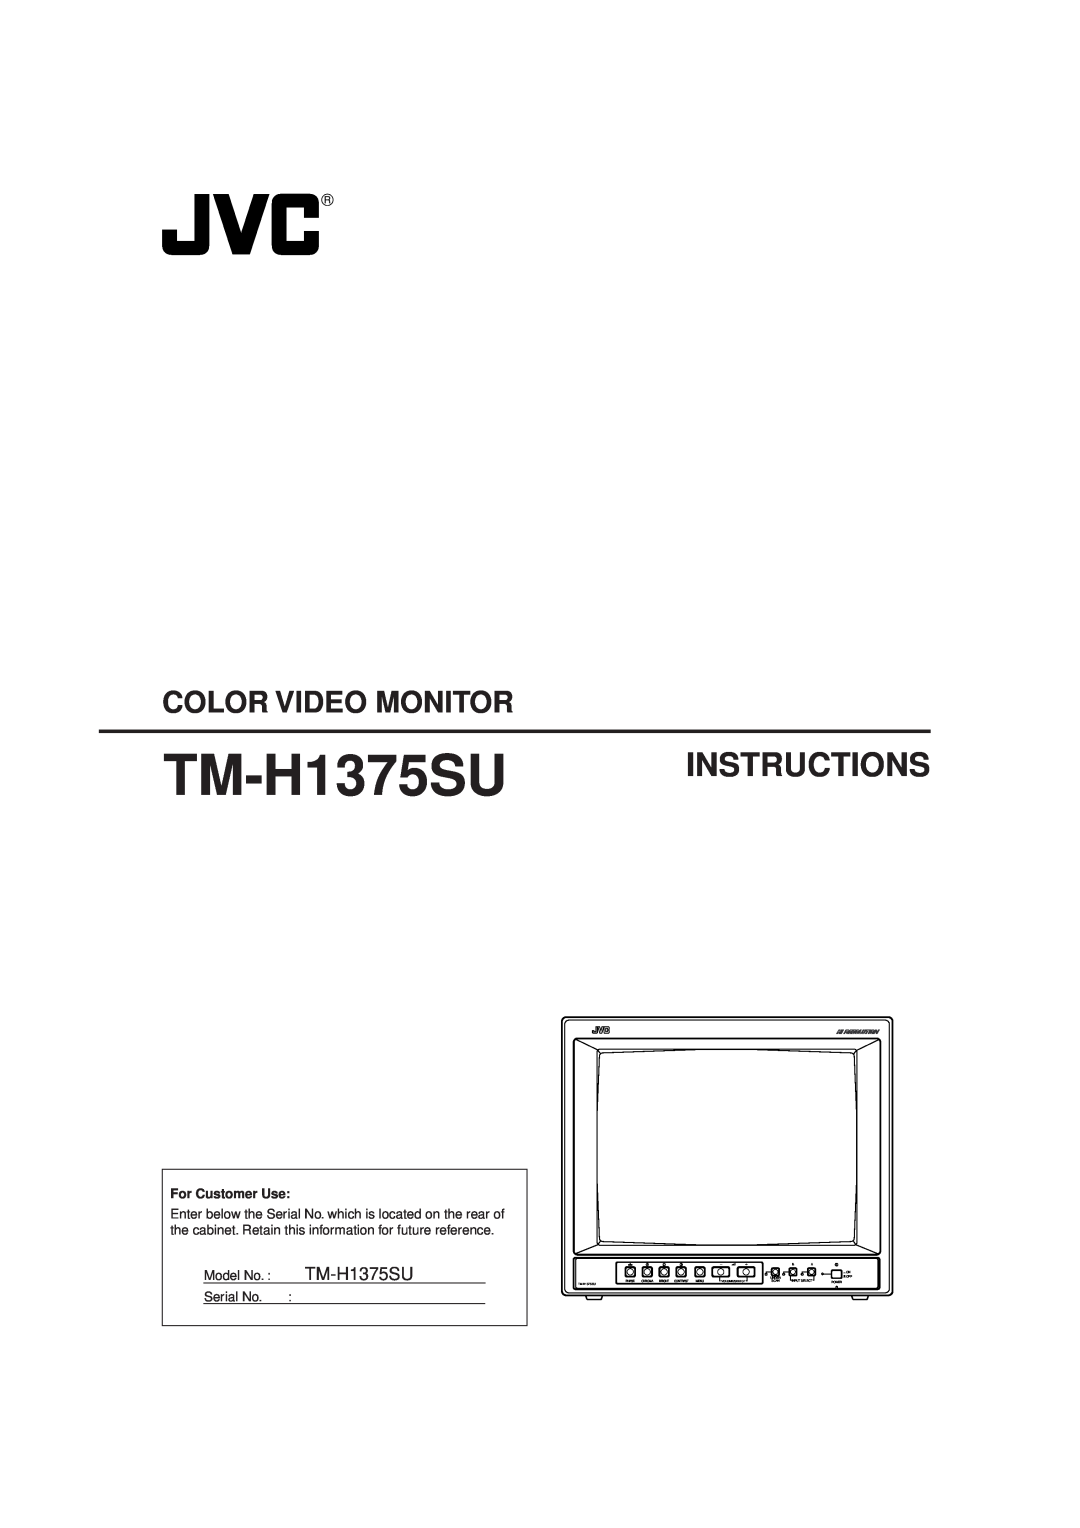 JVC TM-H1375SU manual Color Video Monitor, Instructions 